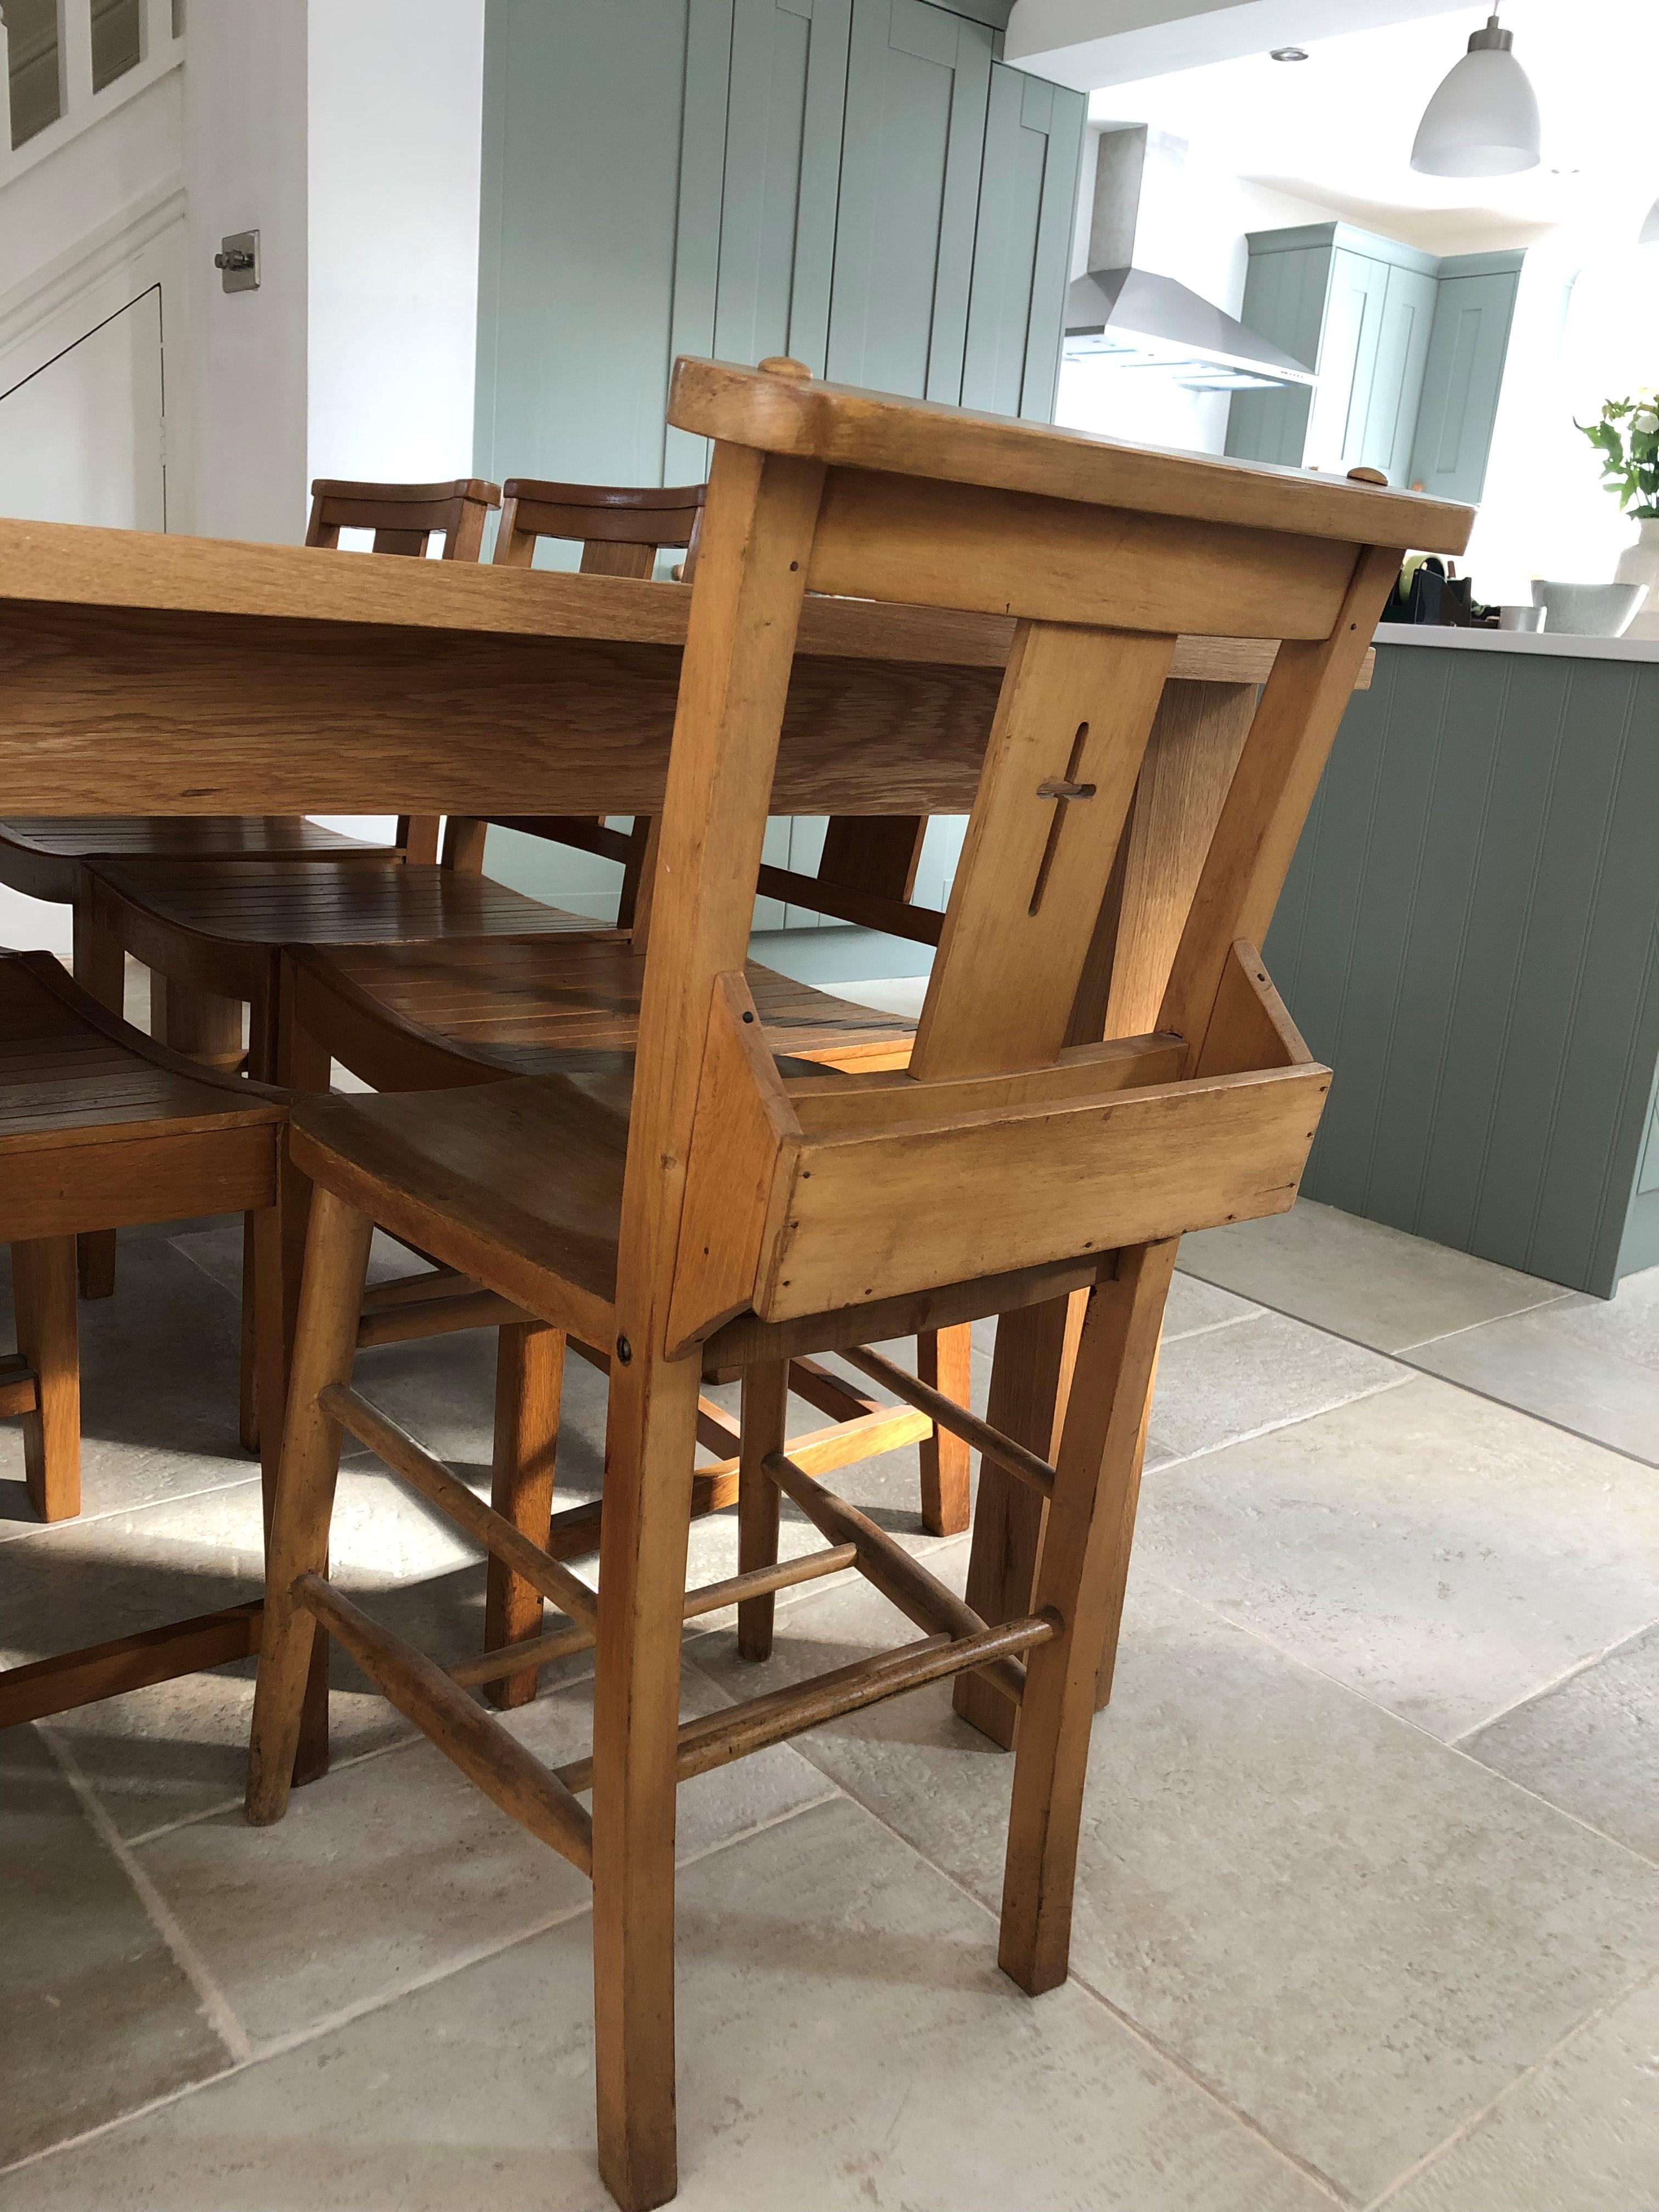 Antique Church Chairs Fitted in a modern style Kitchen. Buy old antique Church chairs from UKAA online. Original Victorian old wooden Chapel chairs